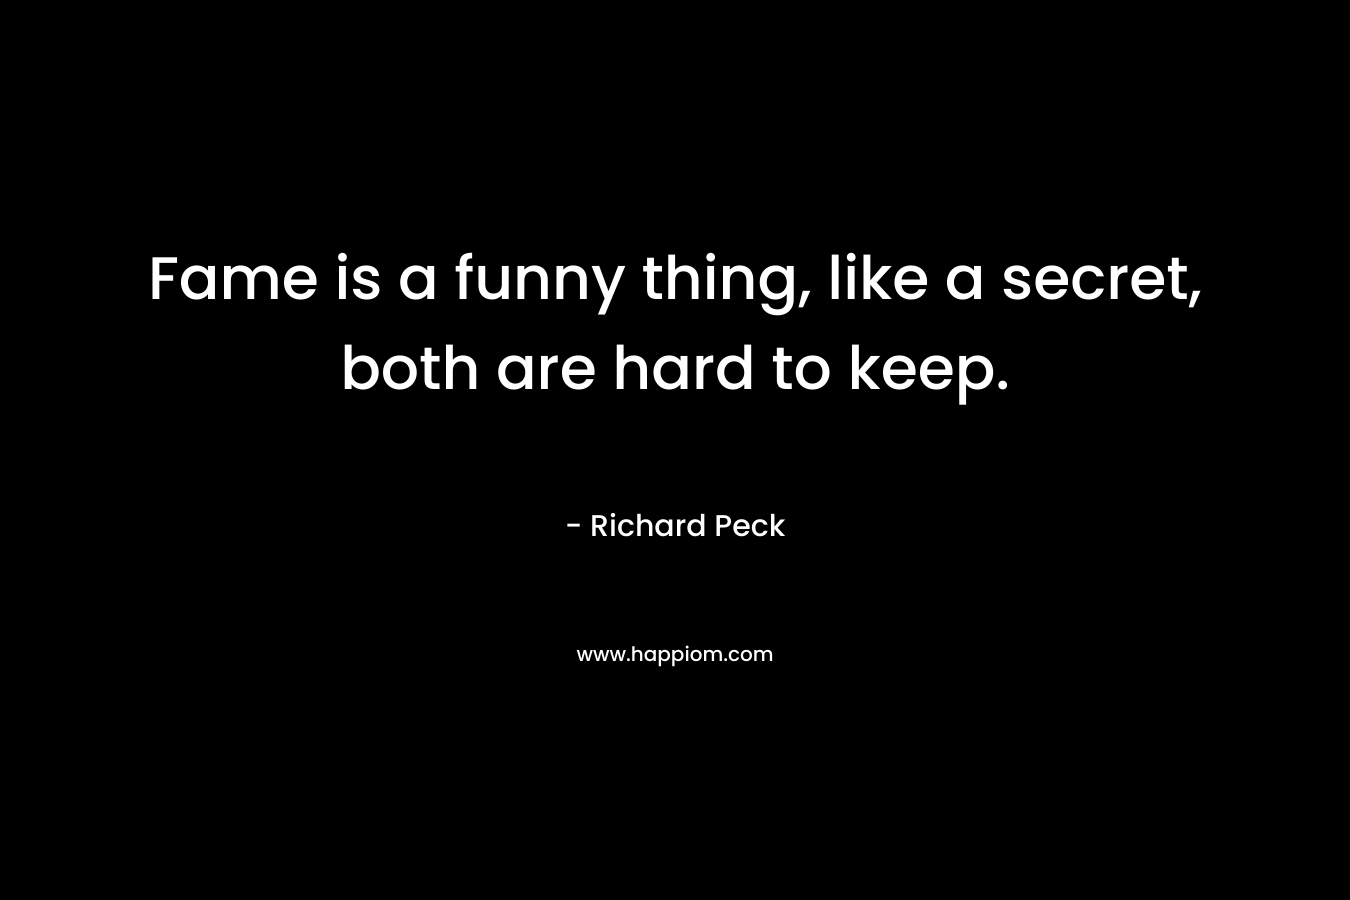 Fame is a funny thing, like a secret, both are hard to keep. – Richard Peck